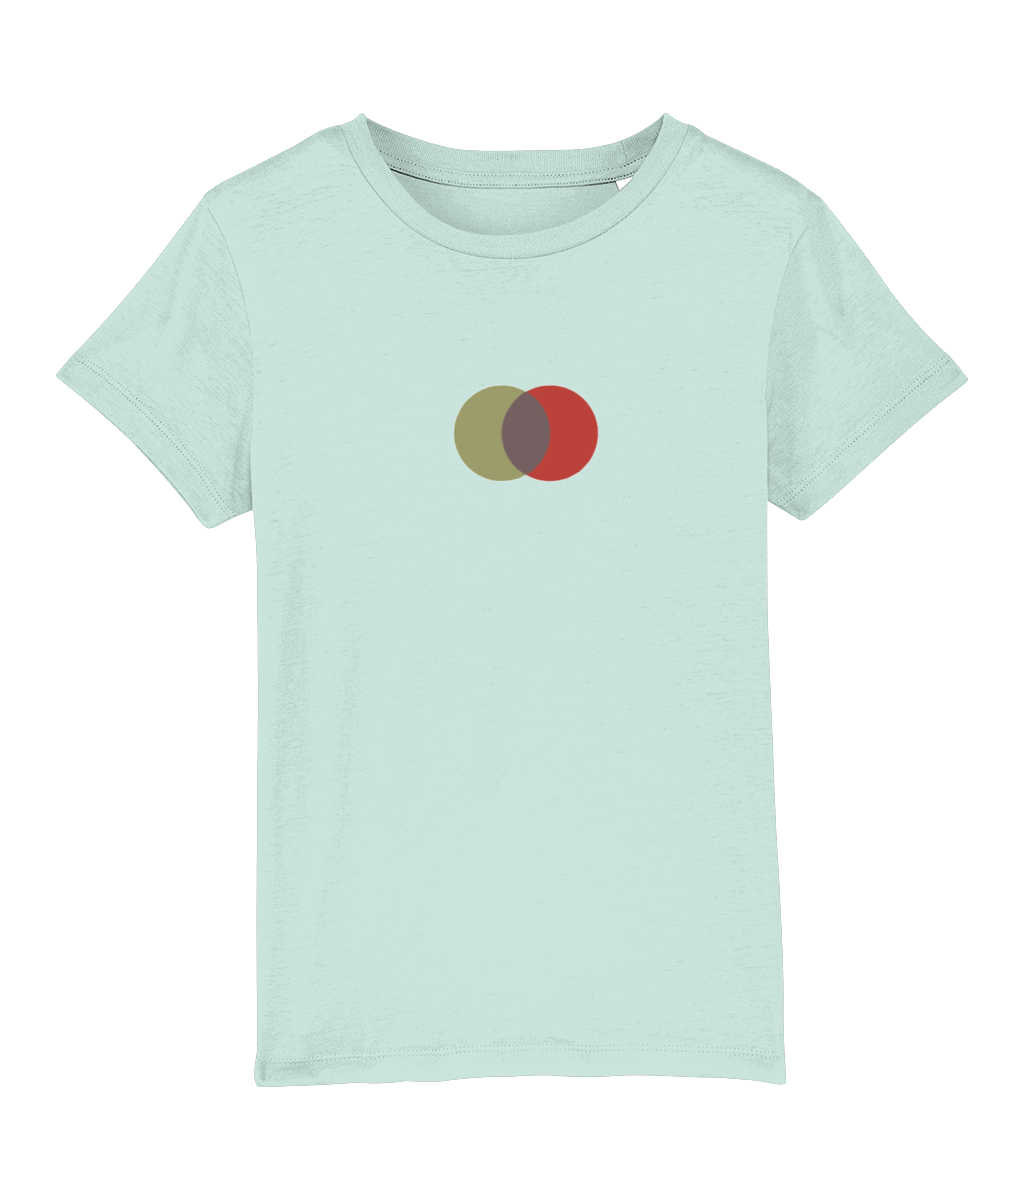 Green Red Makes Brown Organic Cotton T Shirt - Buy any 3 get 10% off